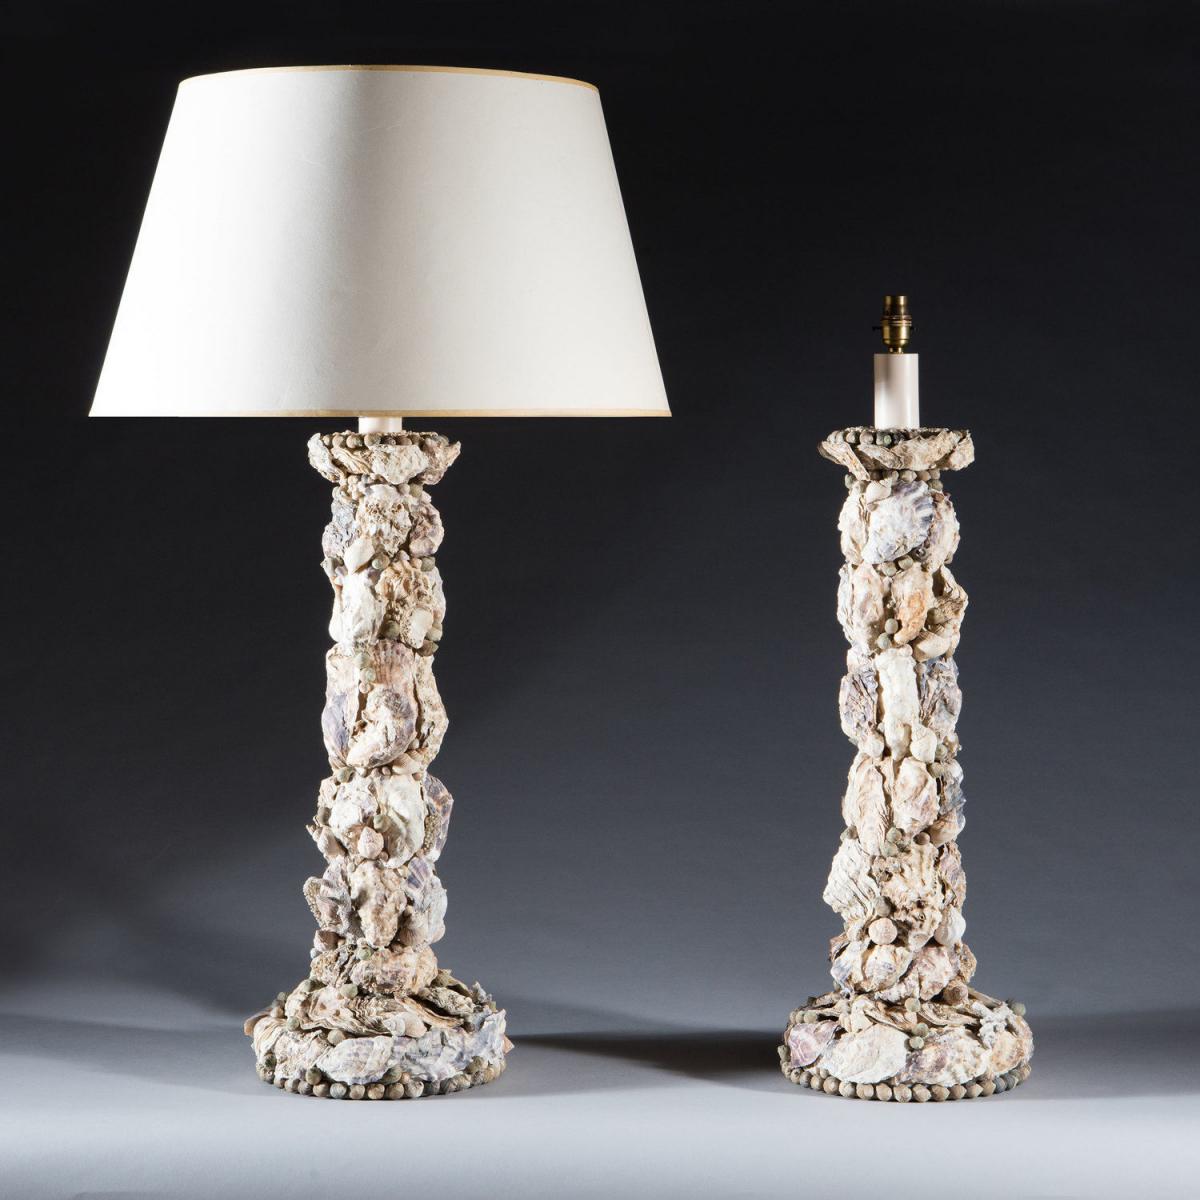 A Fine Pair of Grotto Lamps